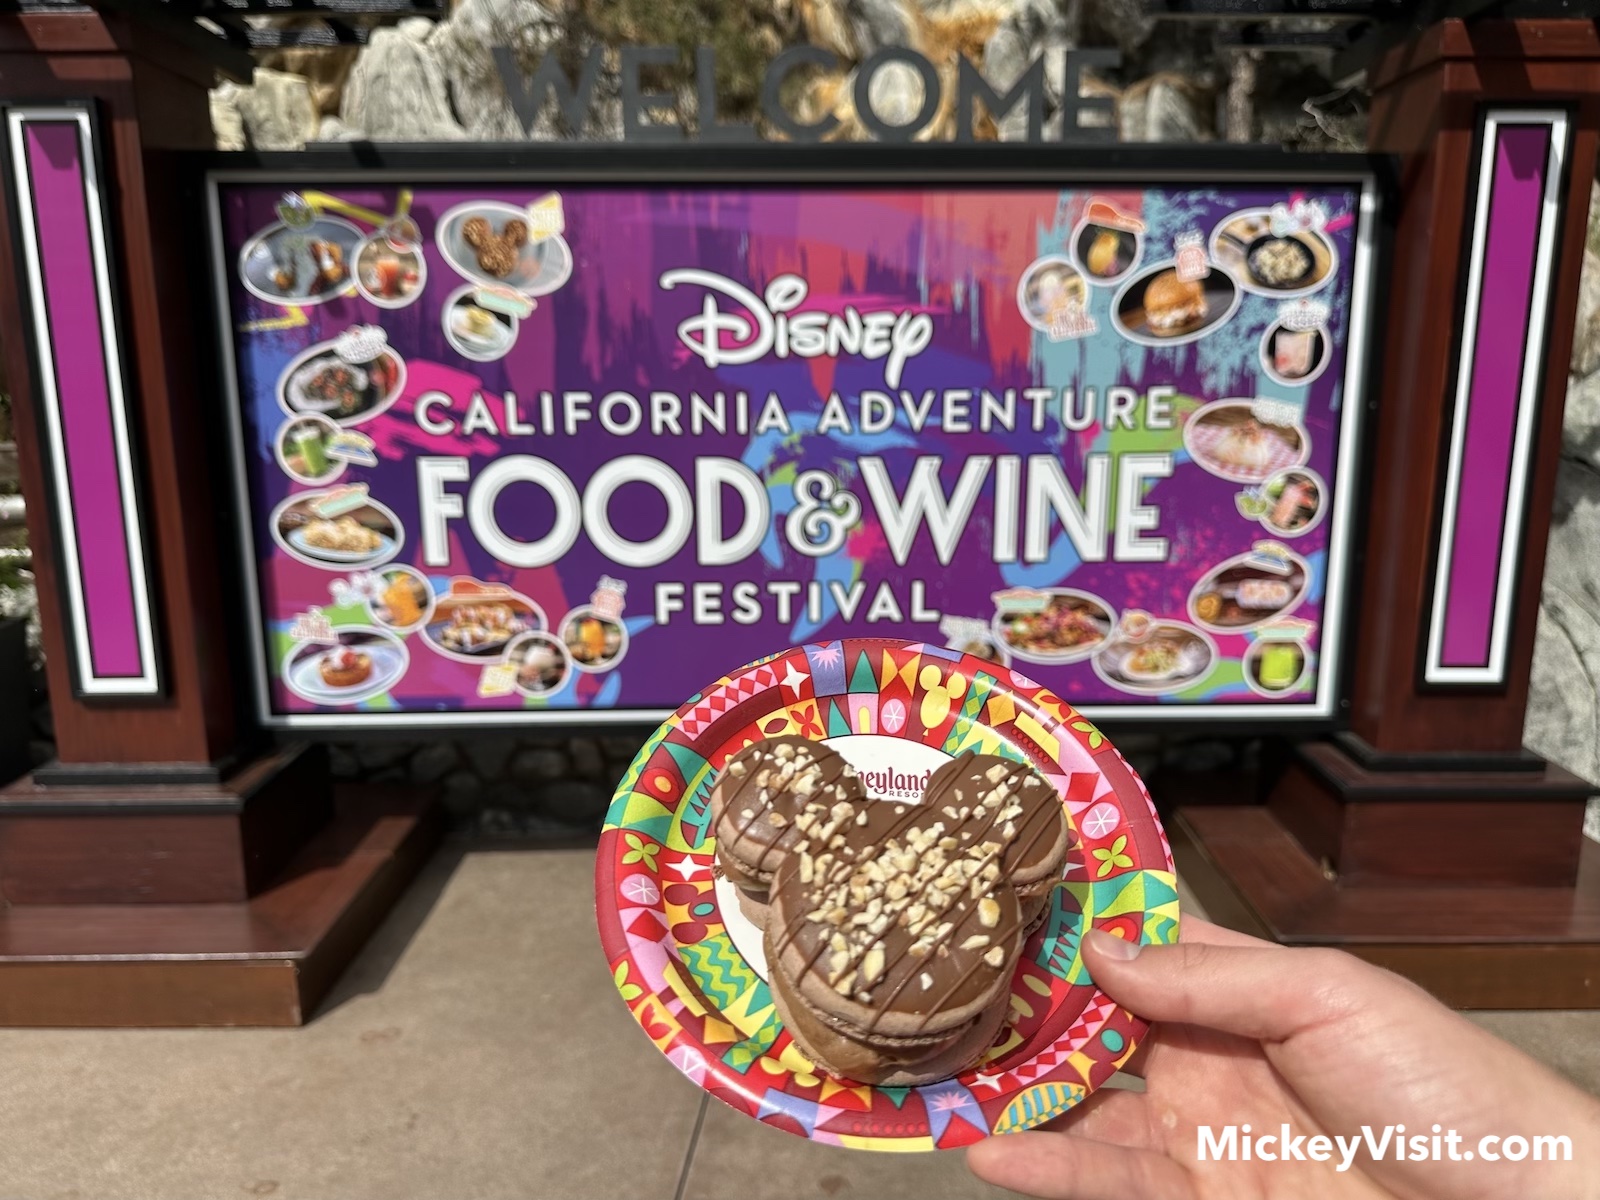 Mickey Mouse shaped treat in front of food and wine sign